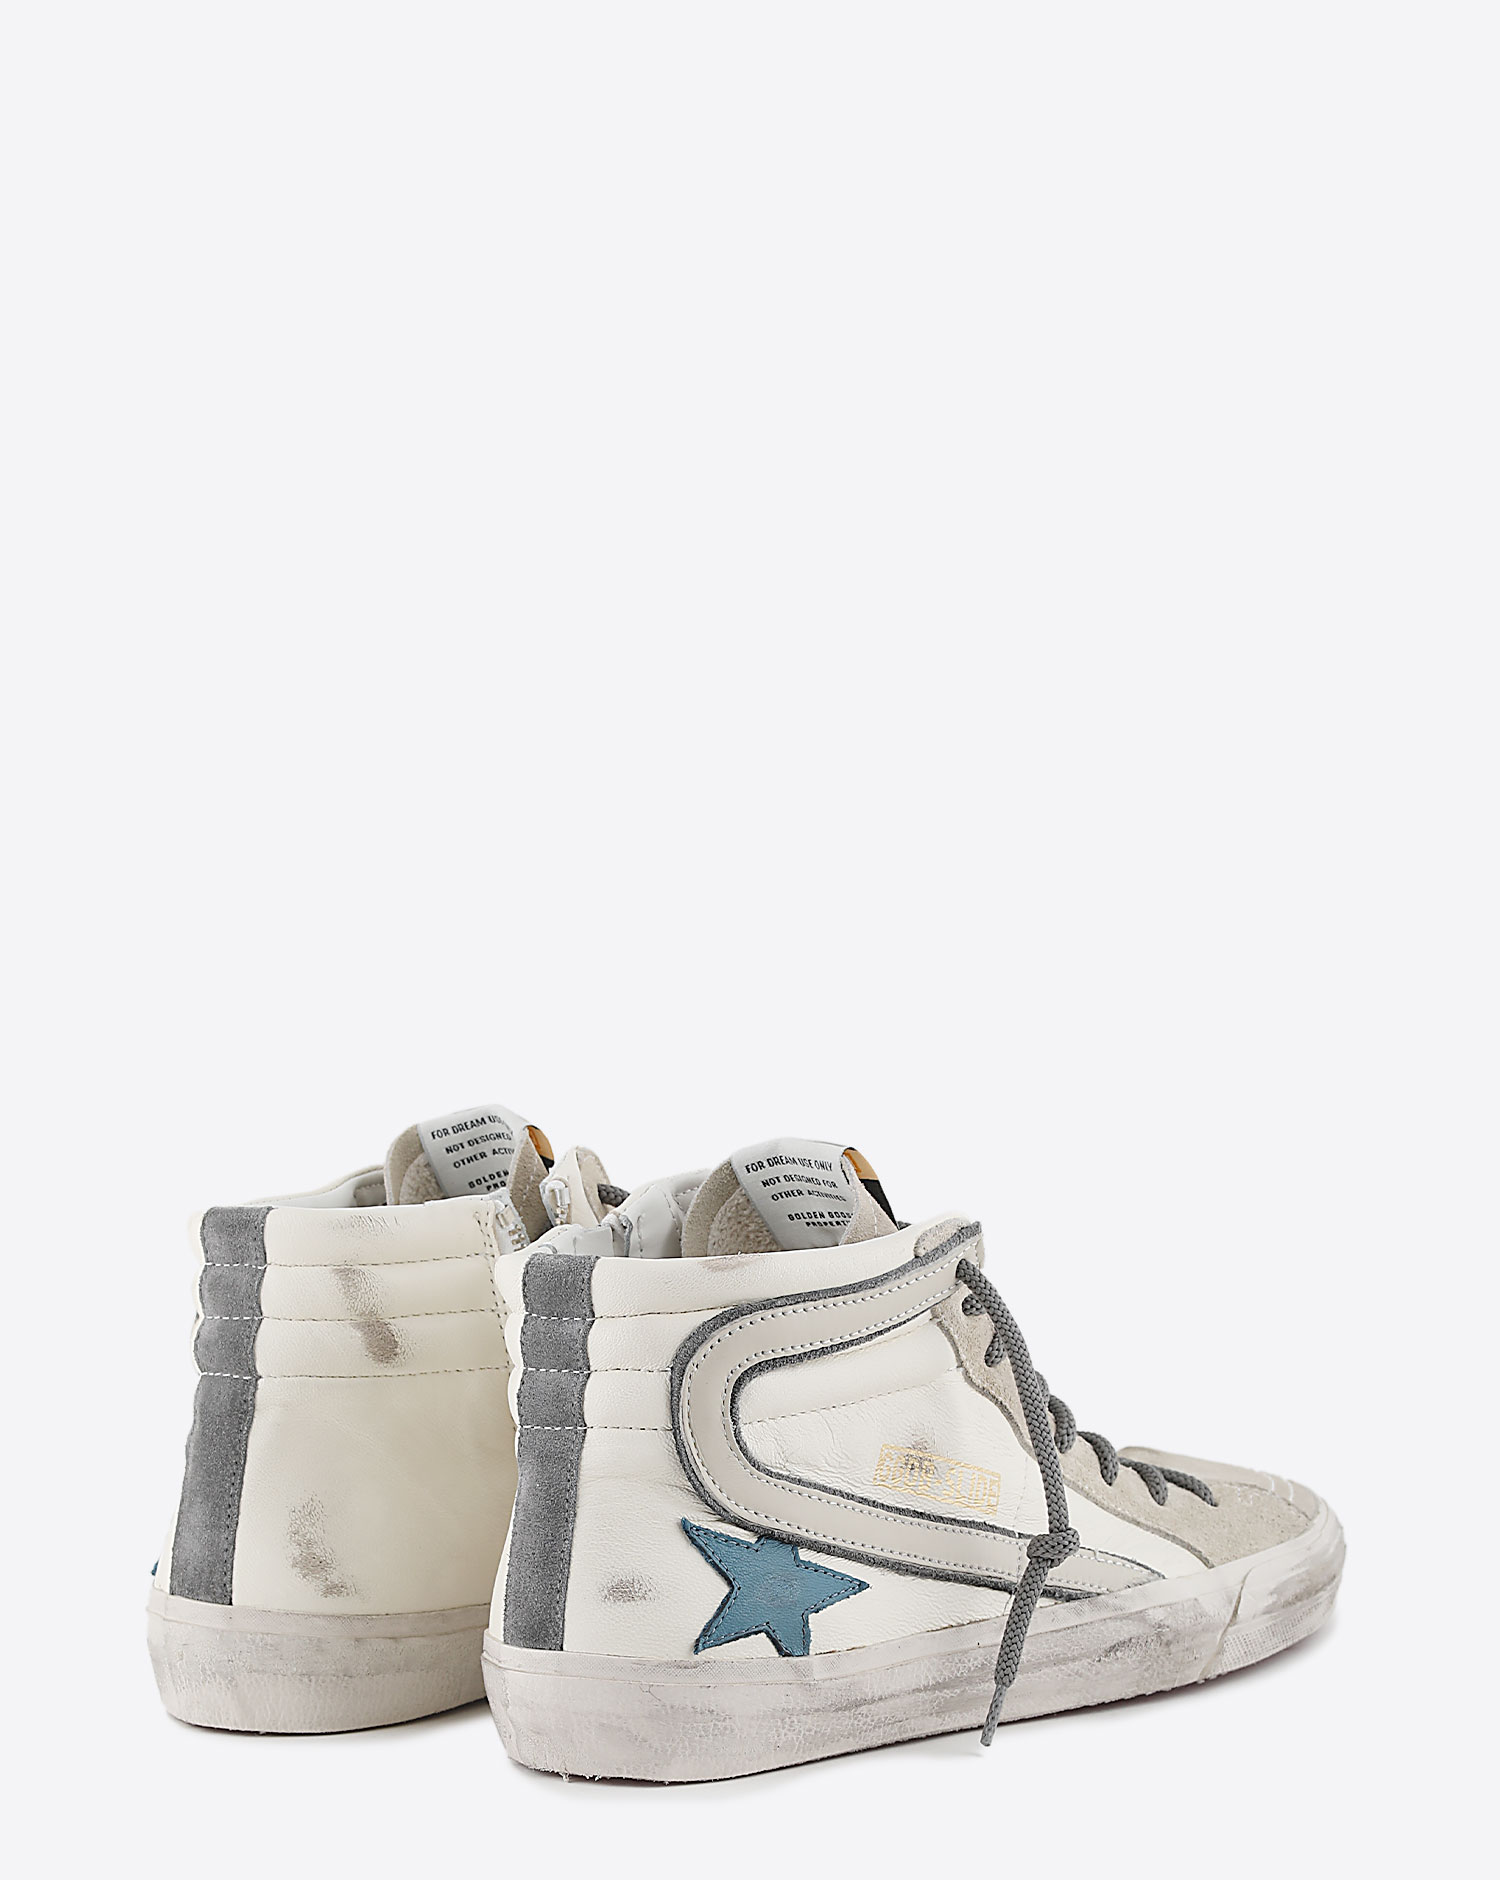 Sneakers Golden Goose Homme White Blue Sand 11382 